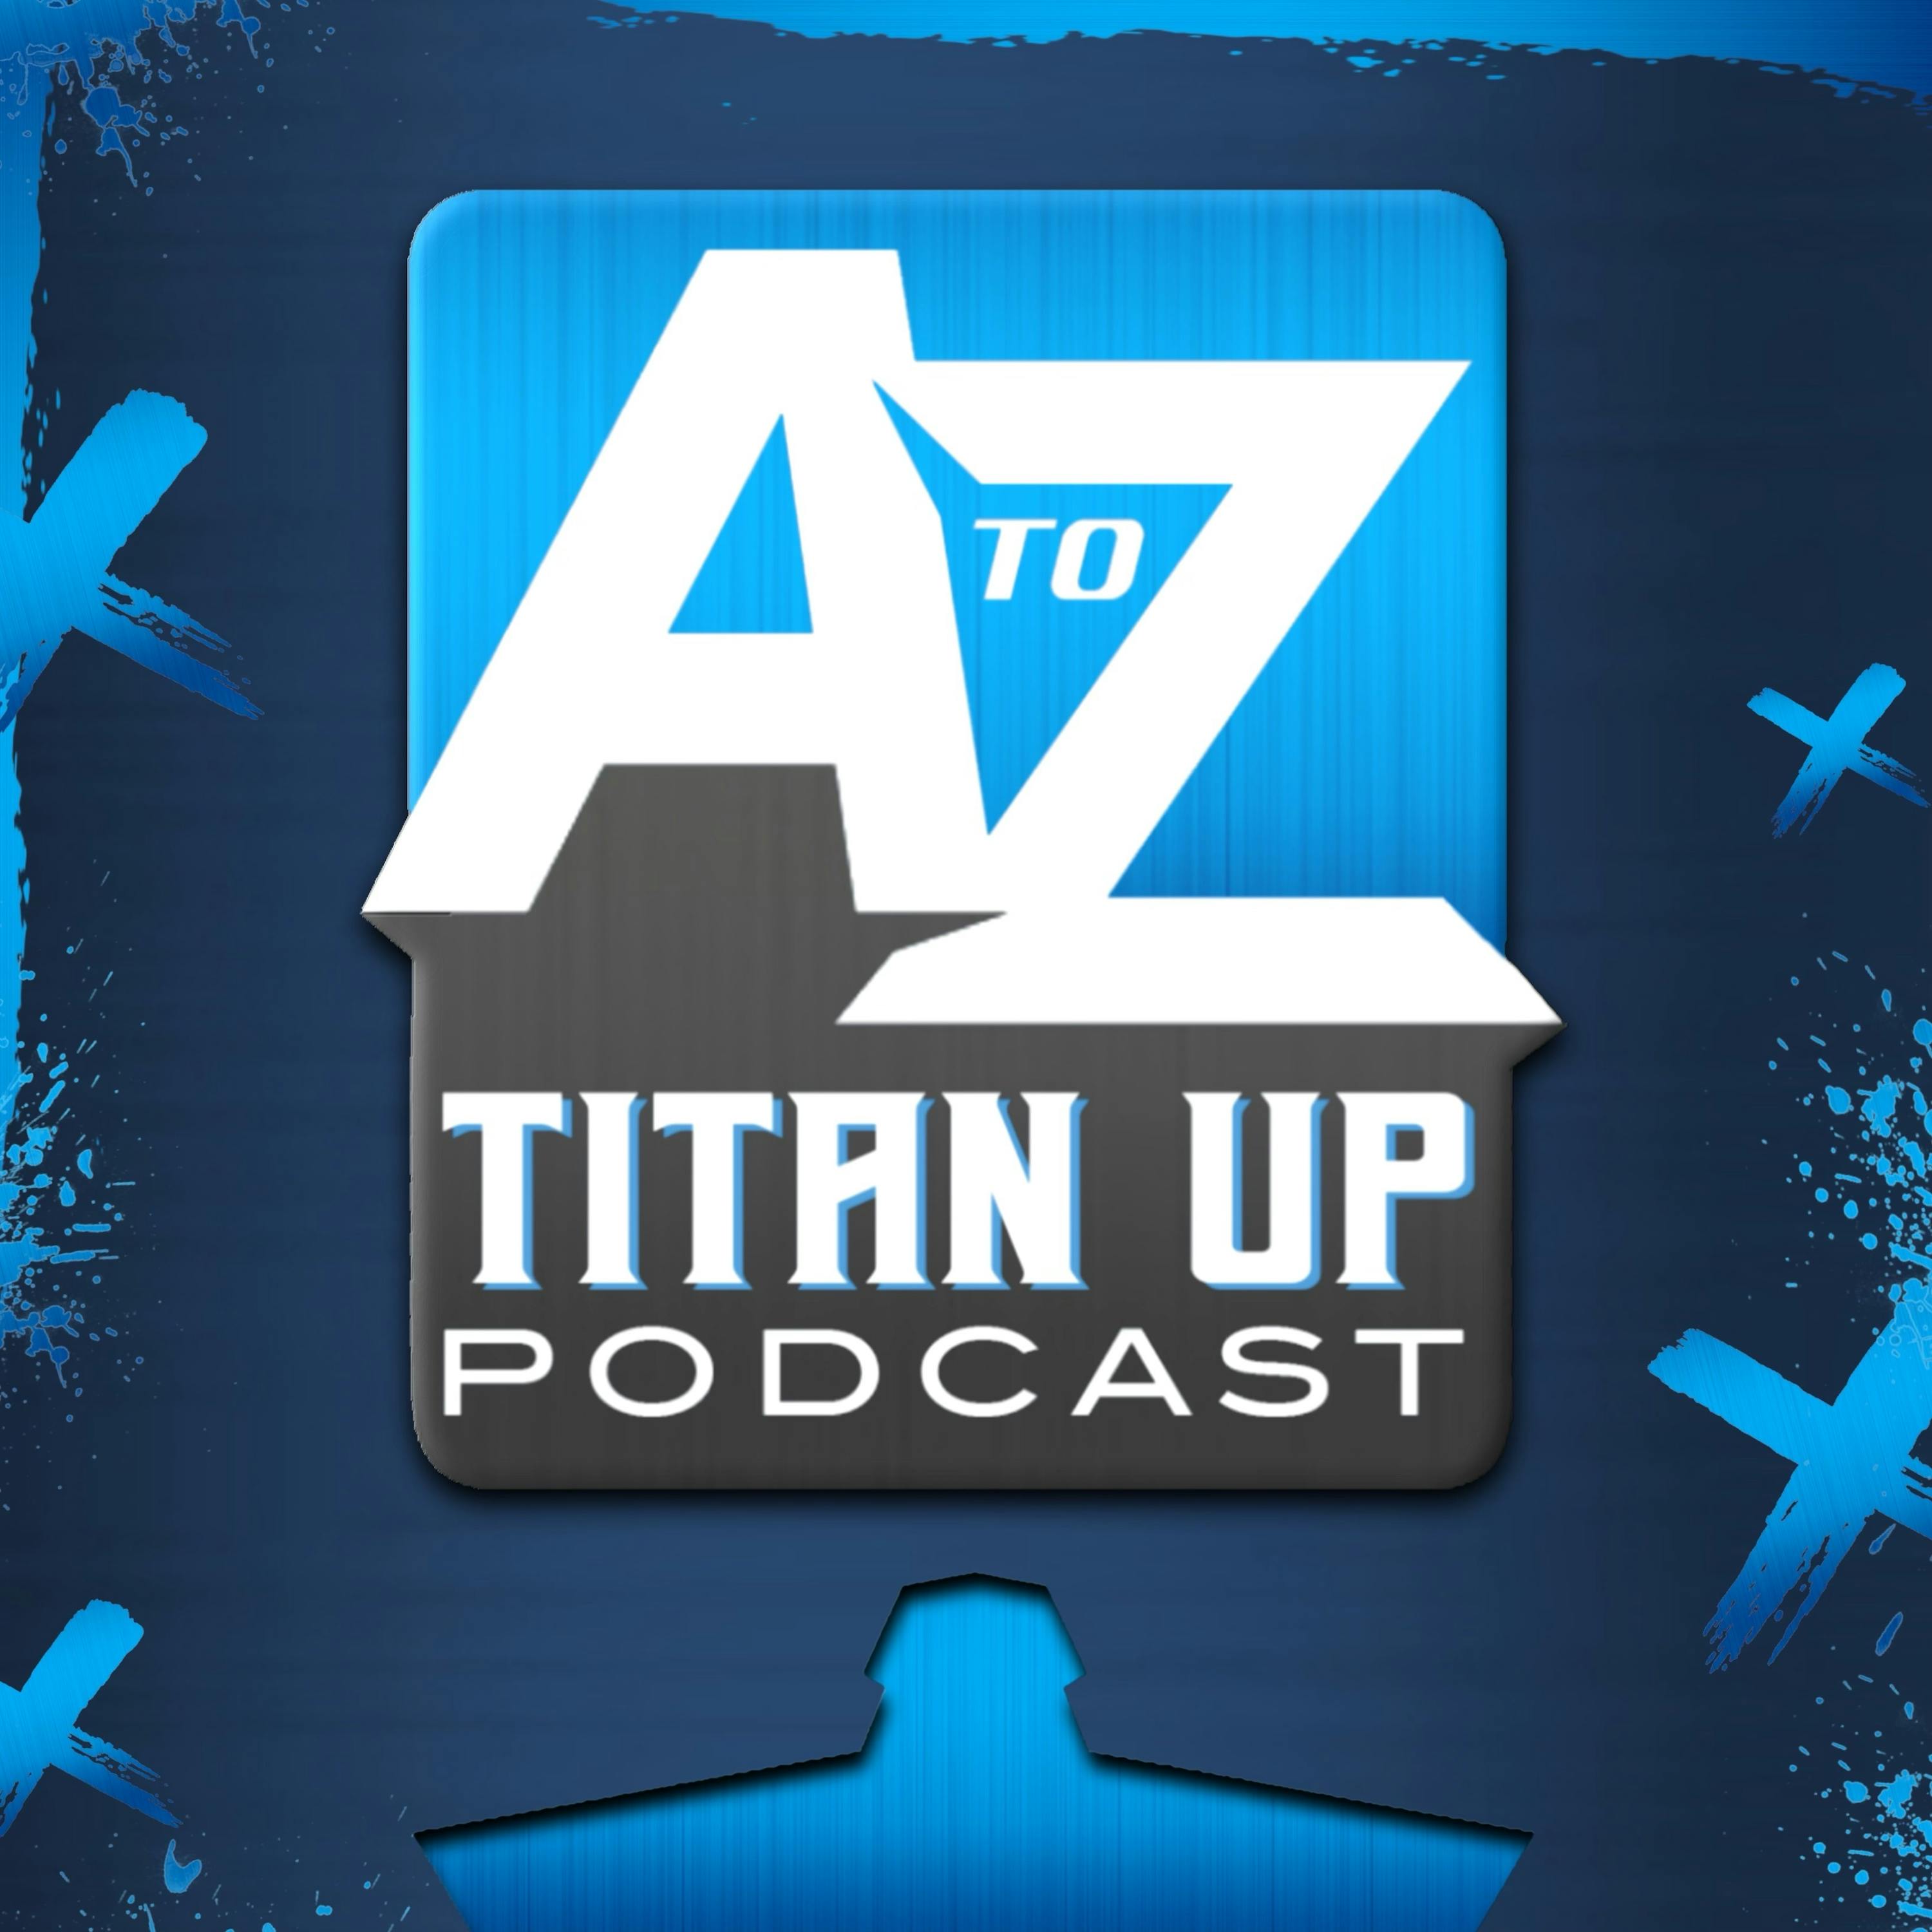 Titan Up Podcast: Ran Keeps Cookin' & Breaking The Rules